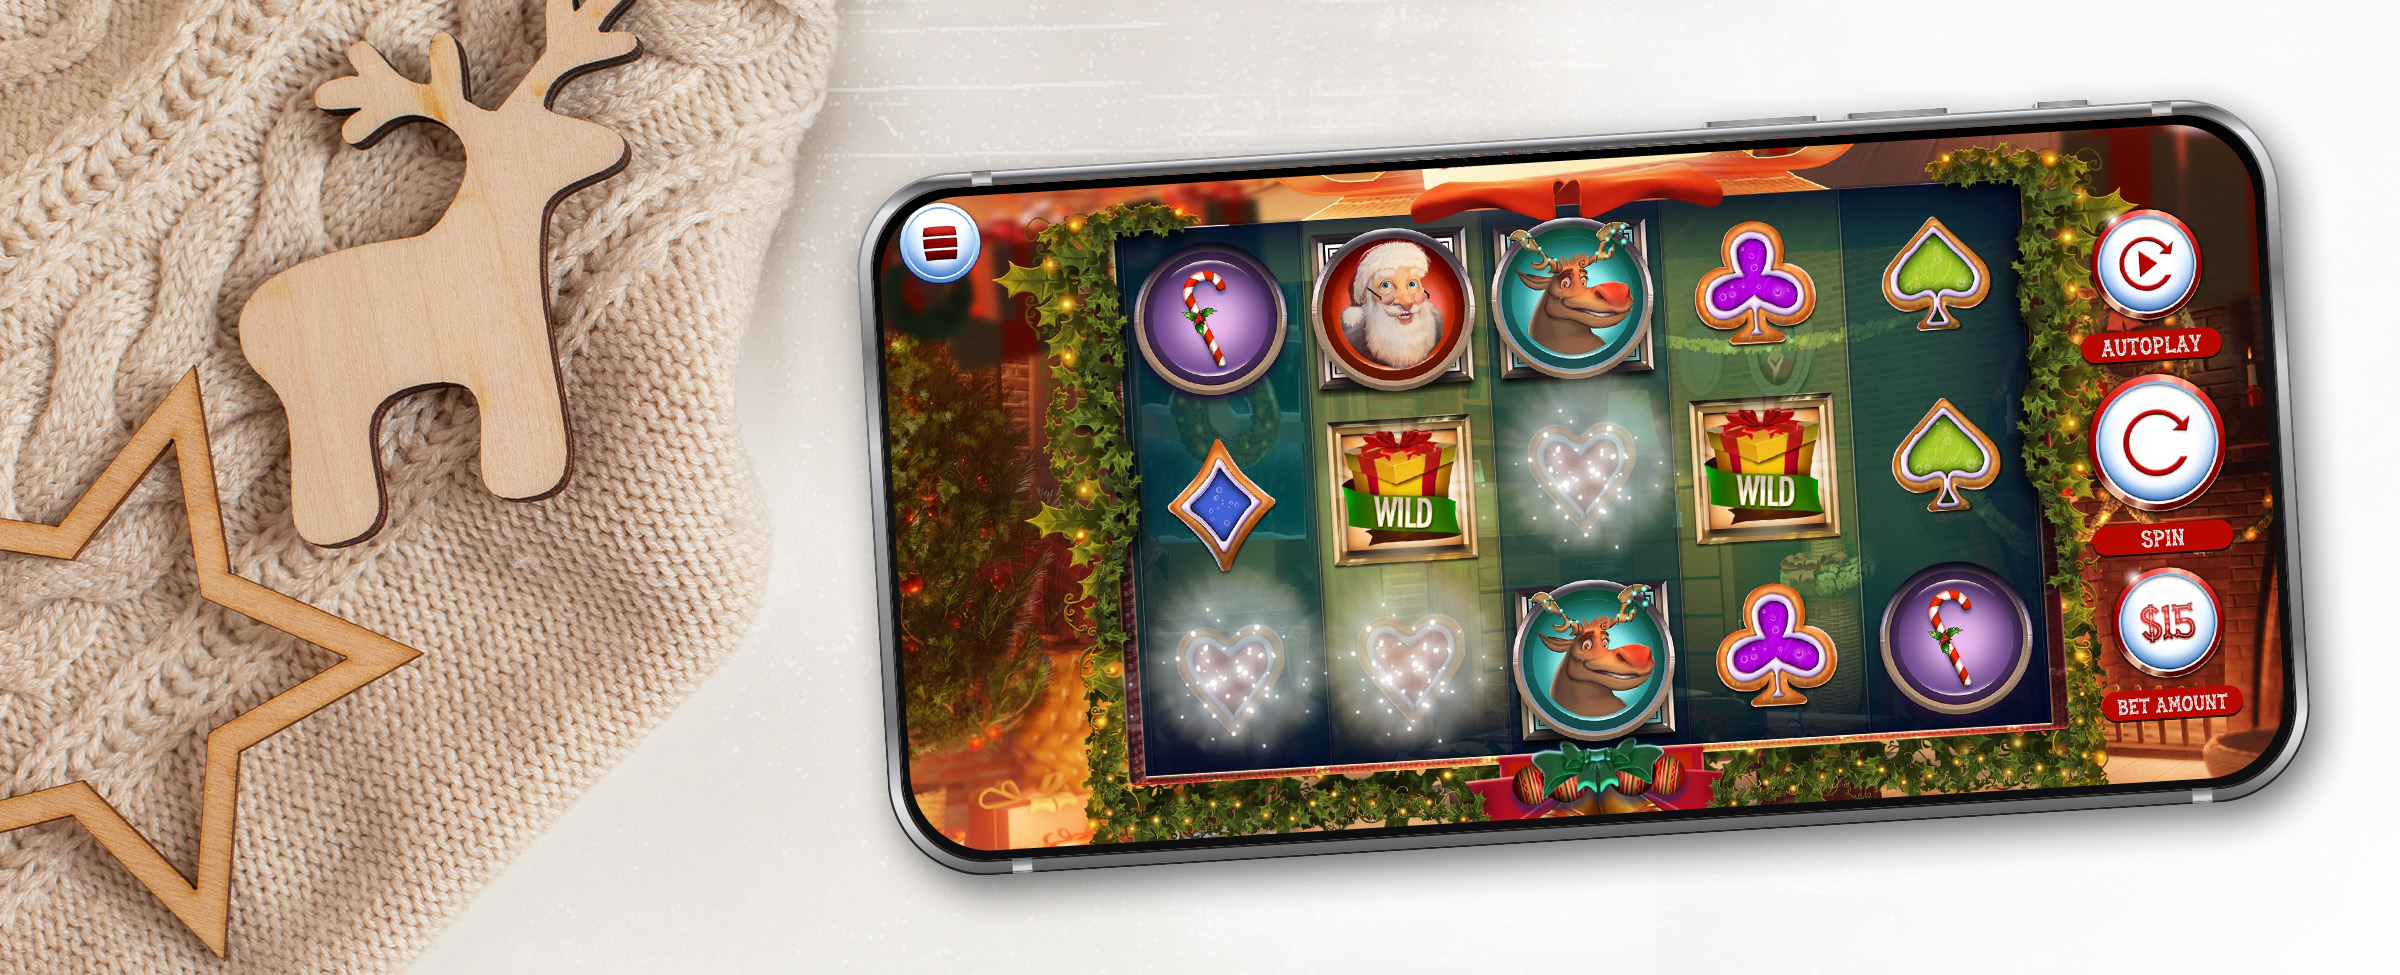 A mobile phone sits atop a white table, showing a screenshot of the Cafe Casino slot game “Santa’s Ways Hot Drop Jackpots” - showcasing the games reels and their features. To the left, is a beige knitted sweater with wooden cut-out shapes of a reindeer and a star.